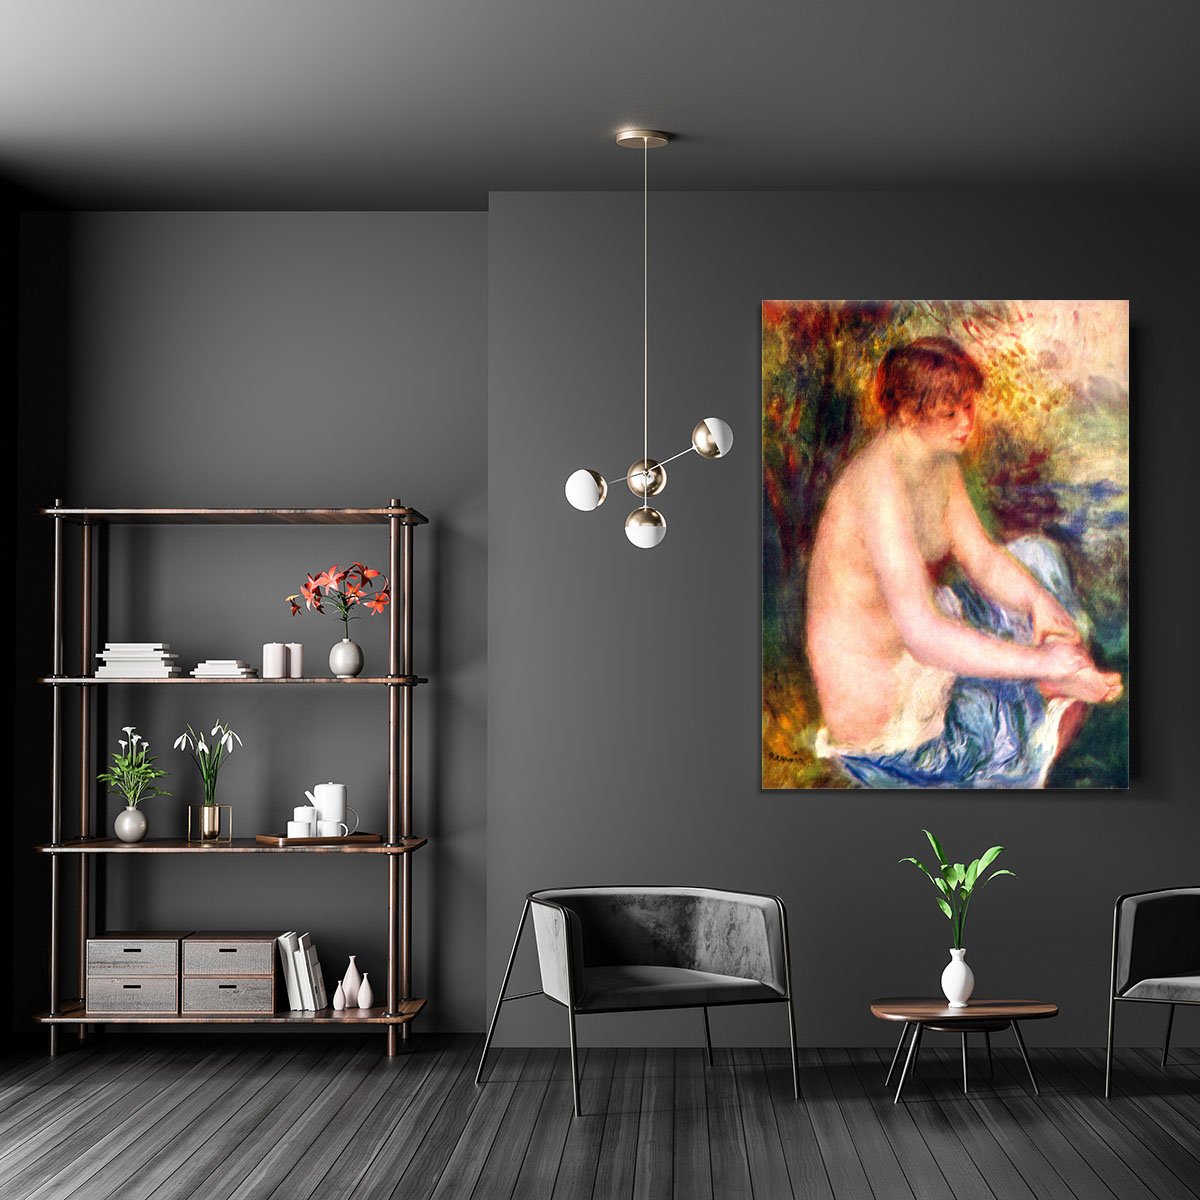 Nude in blue by Renoir Canvas Print or Poster